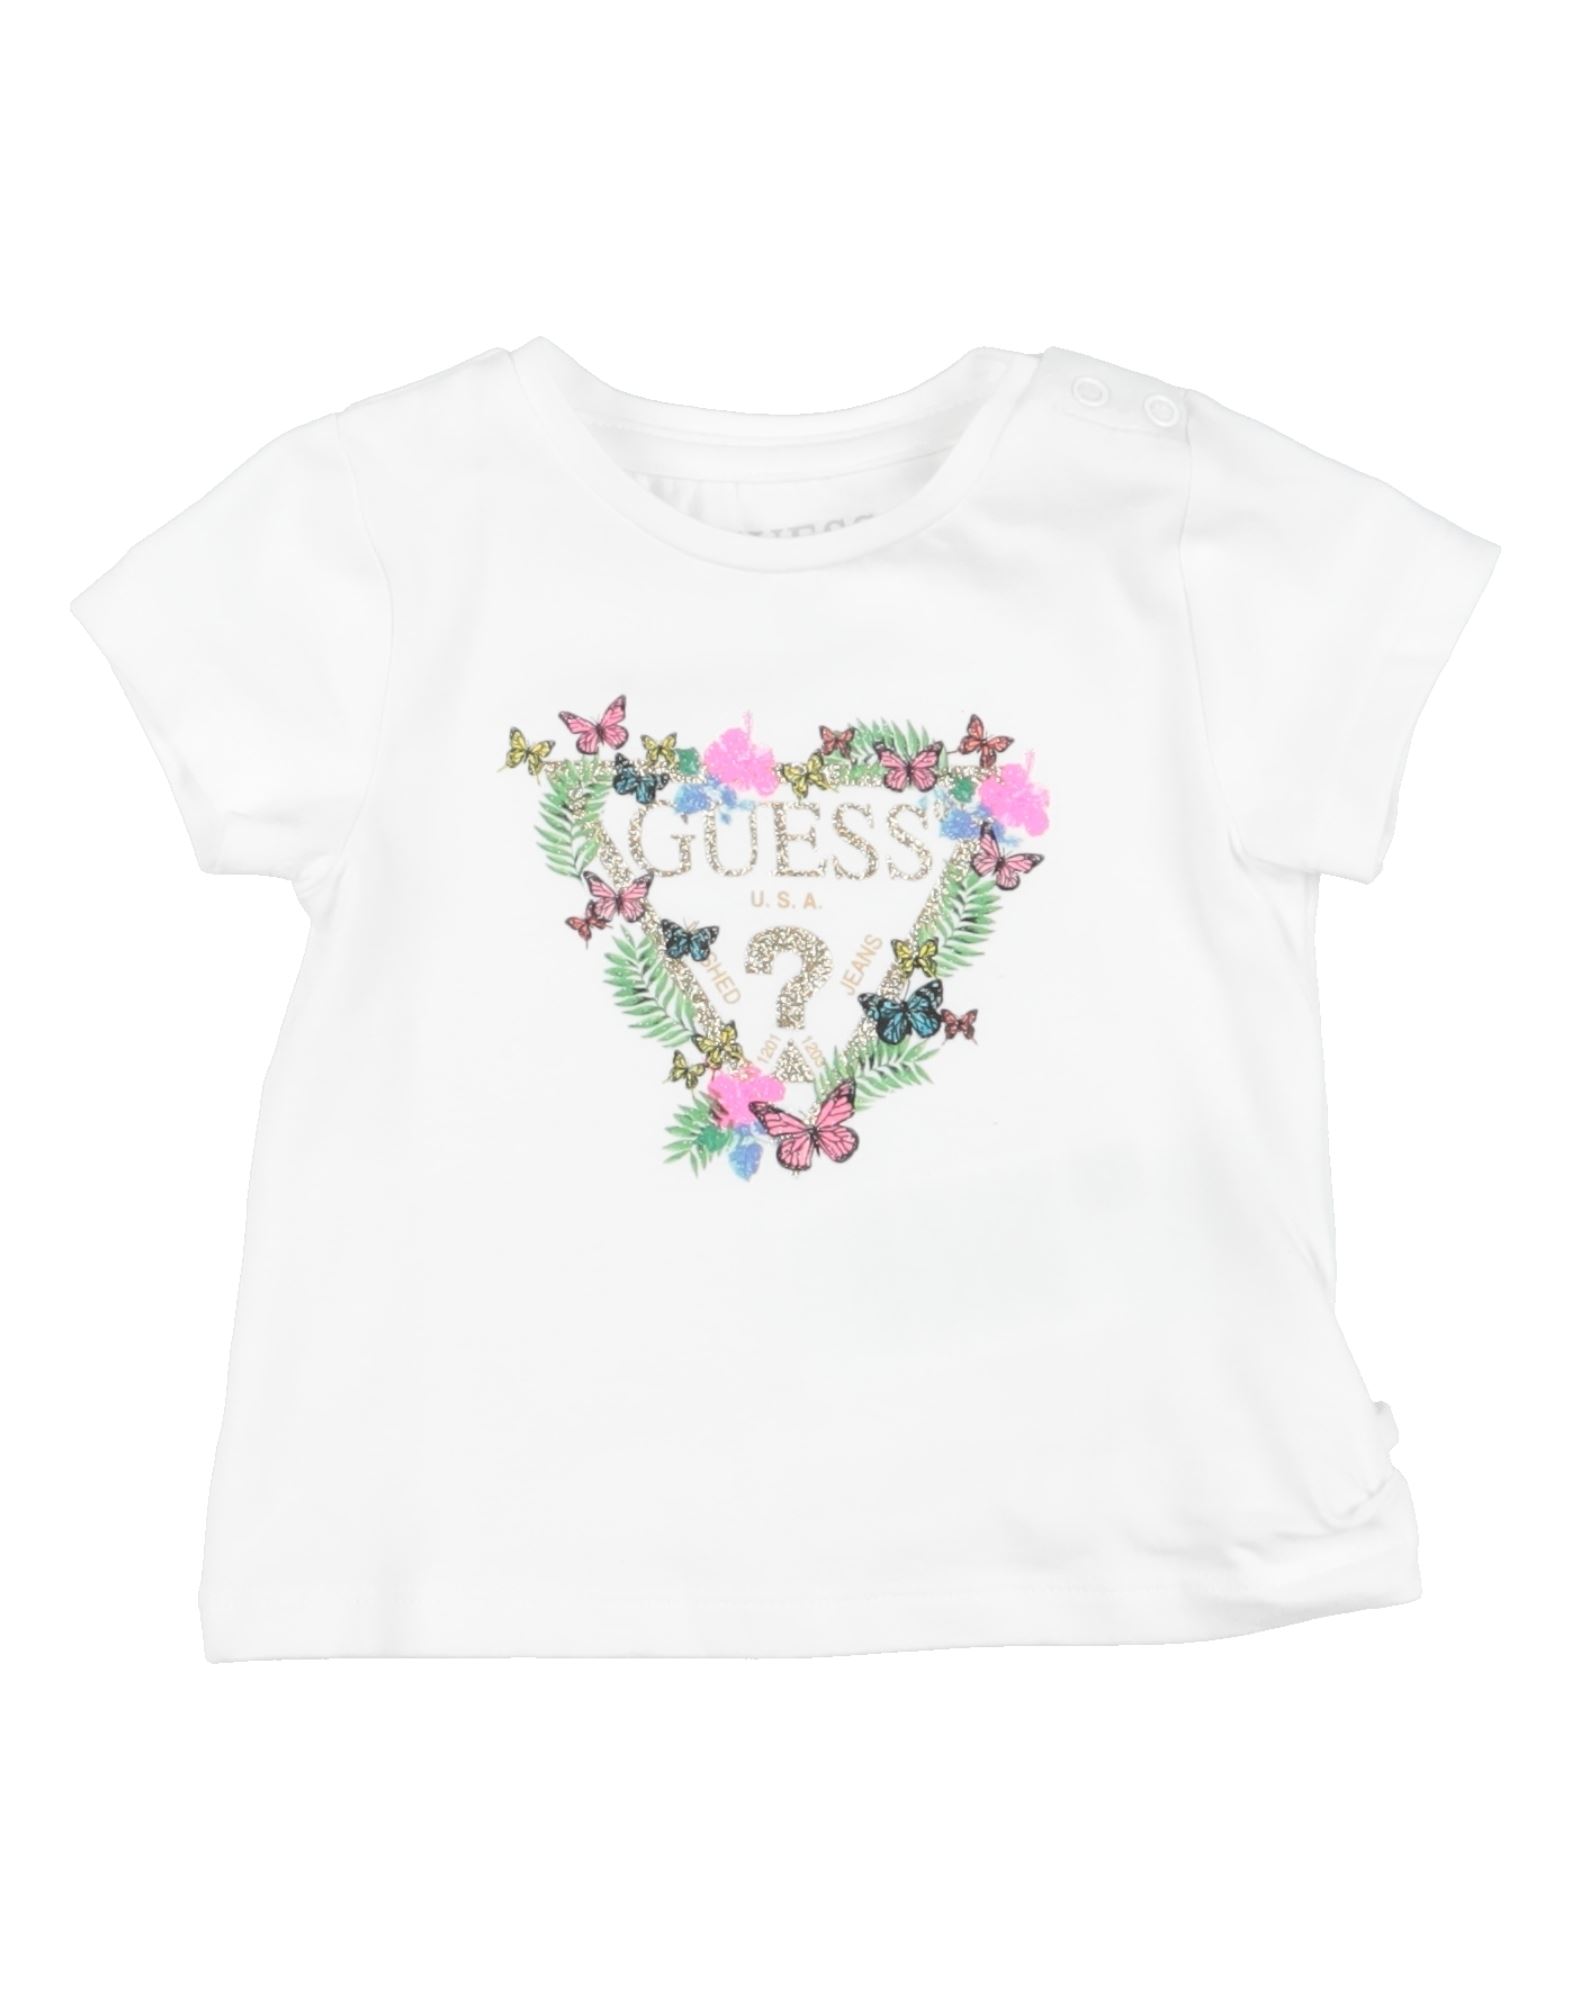 Guess Kids'  T-shirts In White